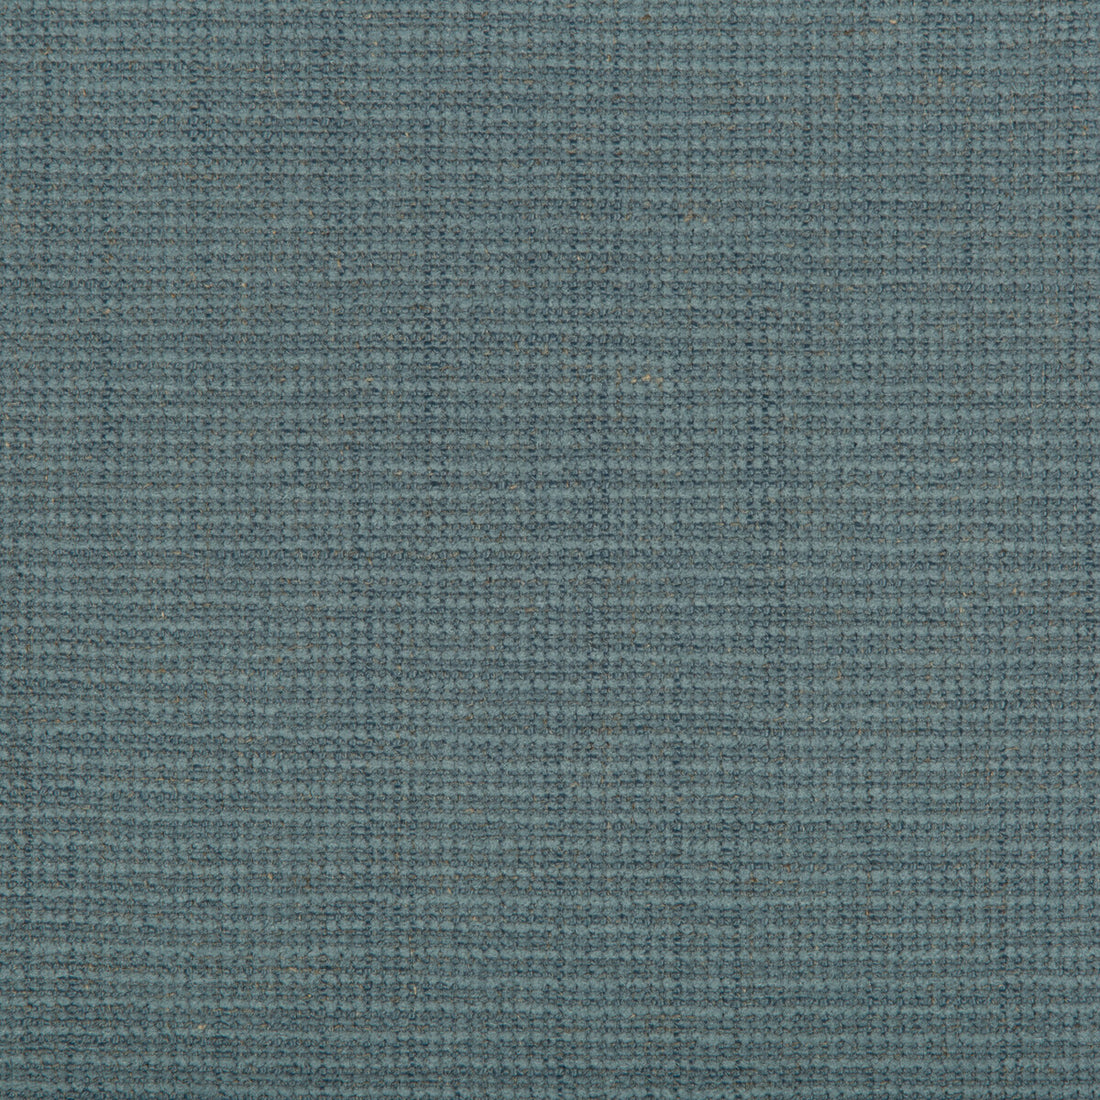 Kravet Smart fabric in 35395-35 color - pattern 35395.35.0 - by Kravet Smart in the Performance Crypton Home collection